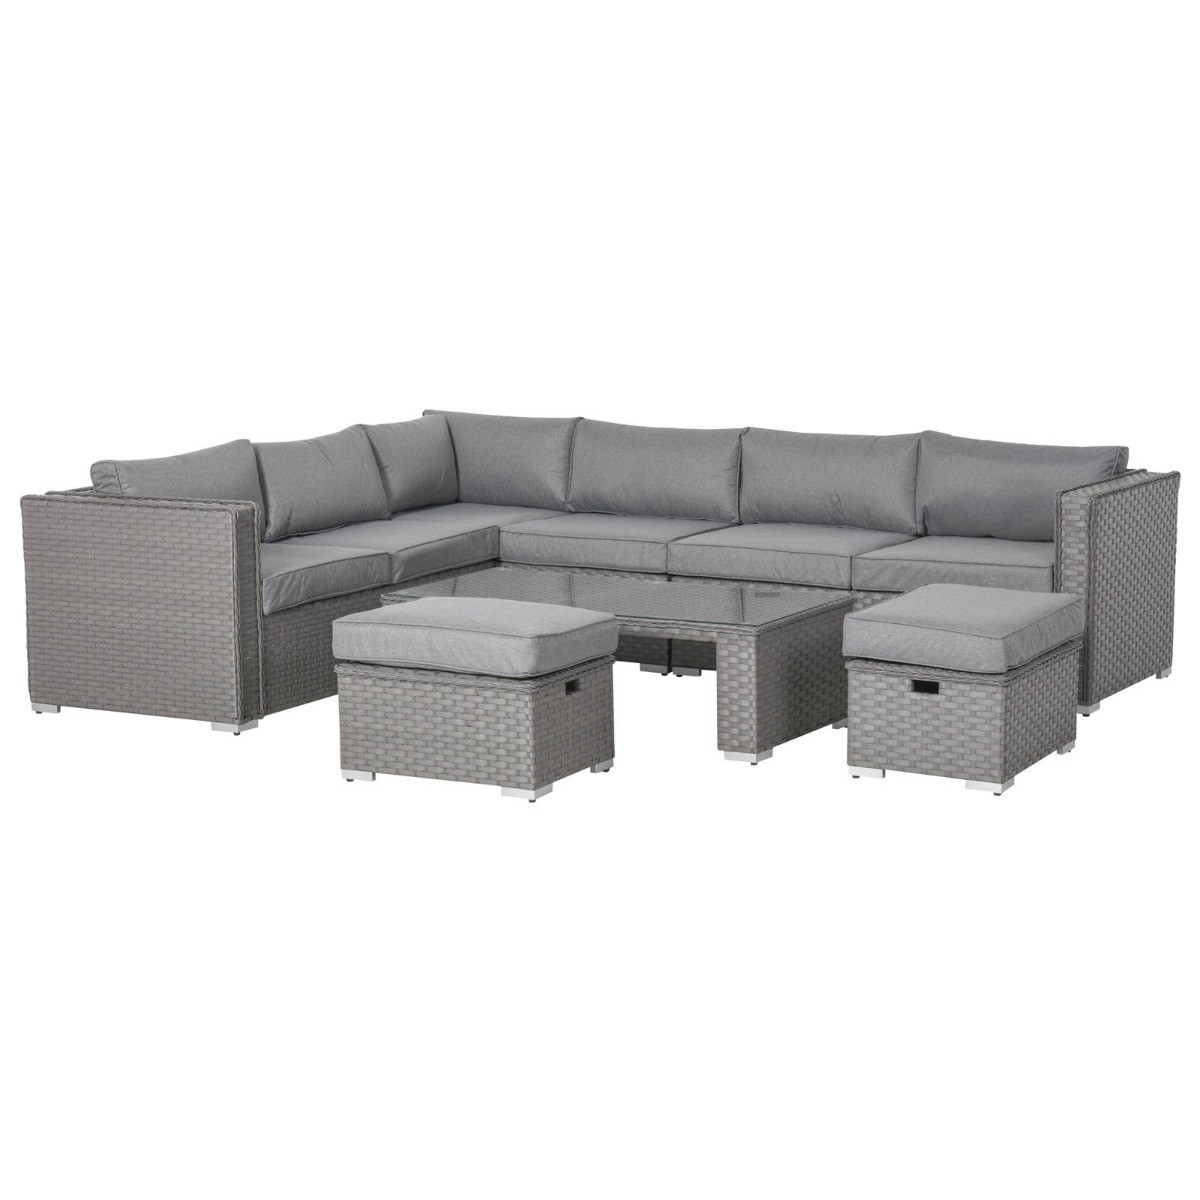 Outsunny Rattan Corner Sofa Set With Table & Footstools, Grey - 8 Seater>